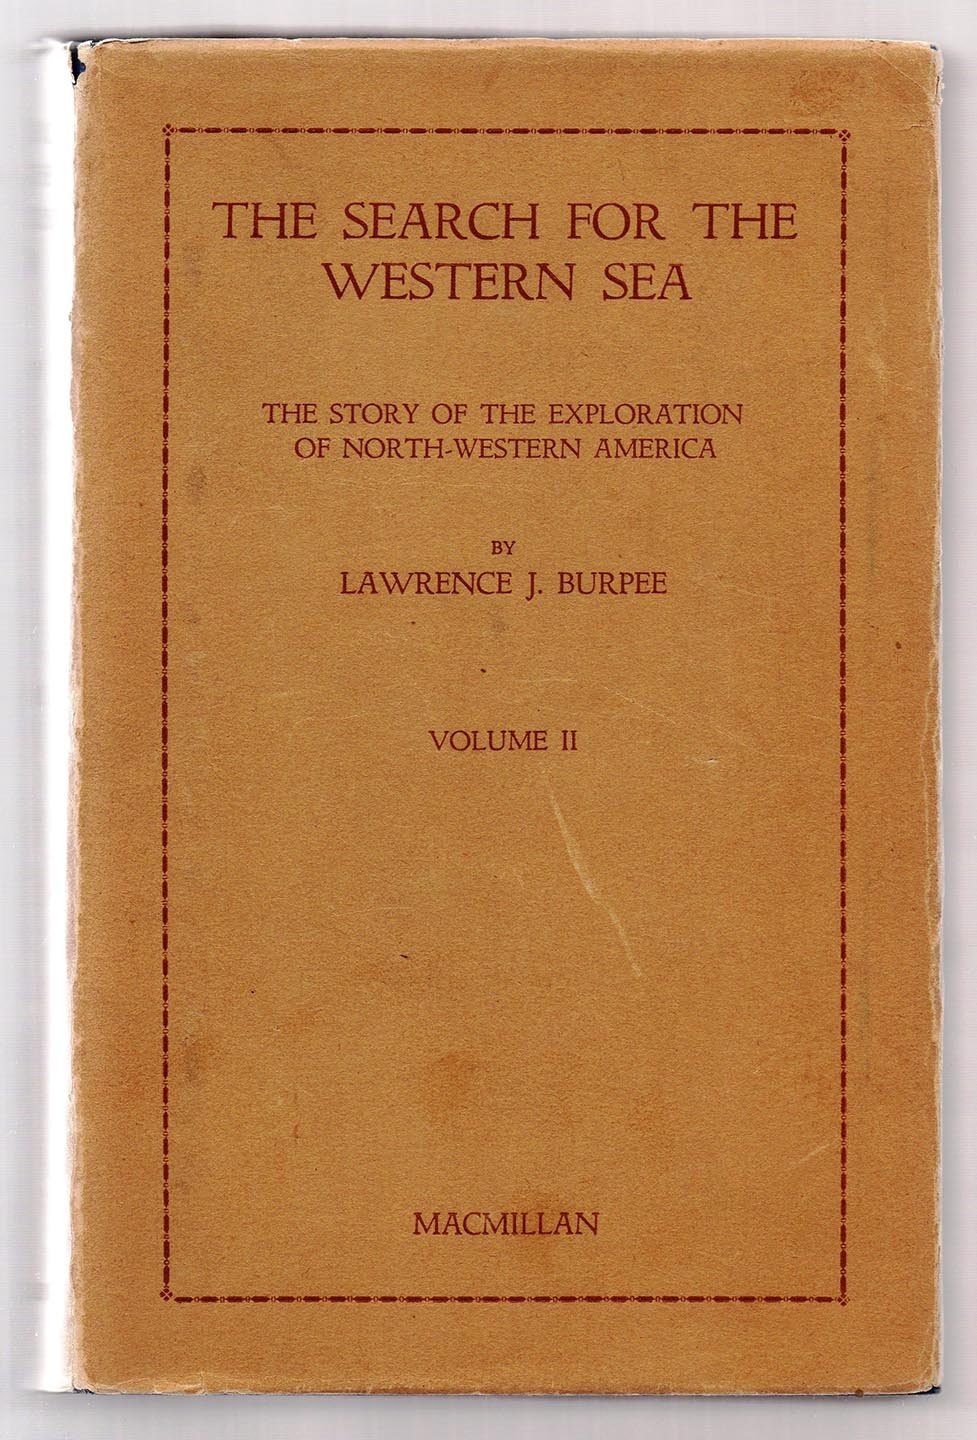 The Search for The Western Sea: The Story of the Exploration of North-Western America (Volume II only)